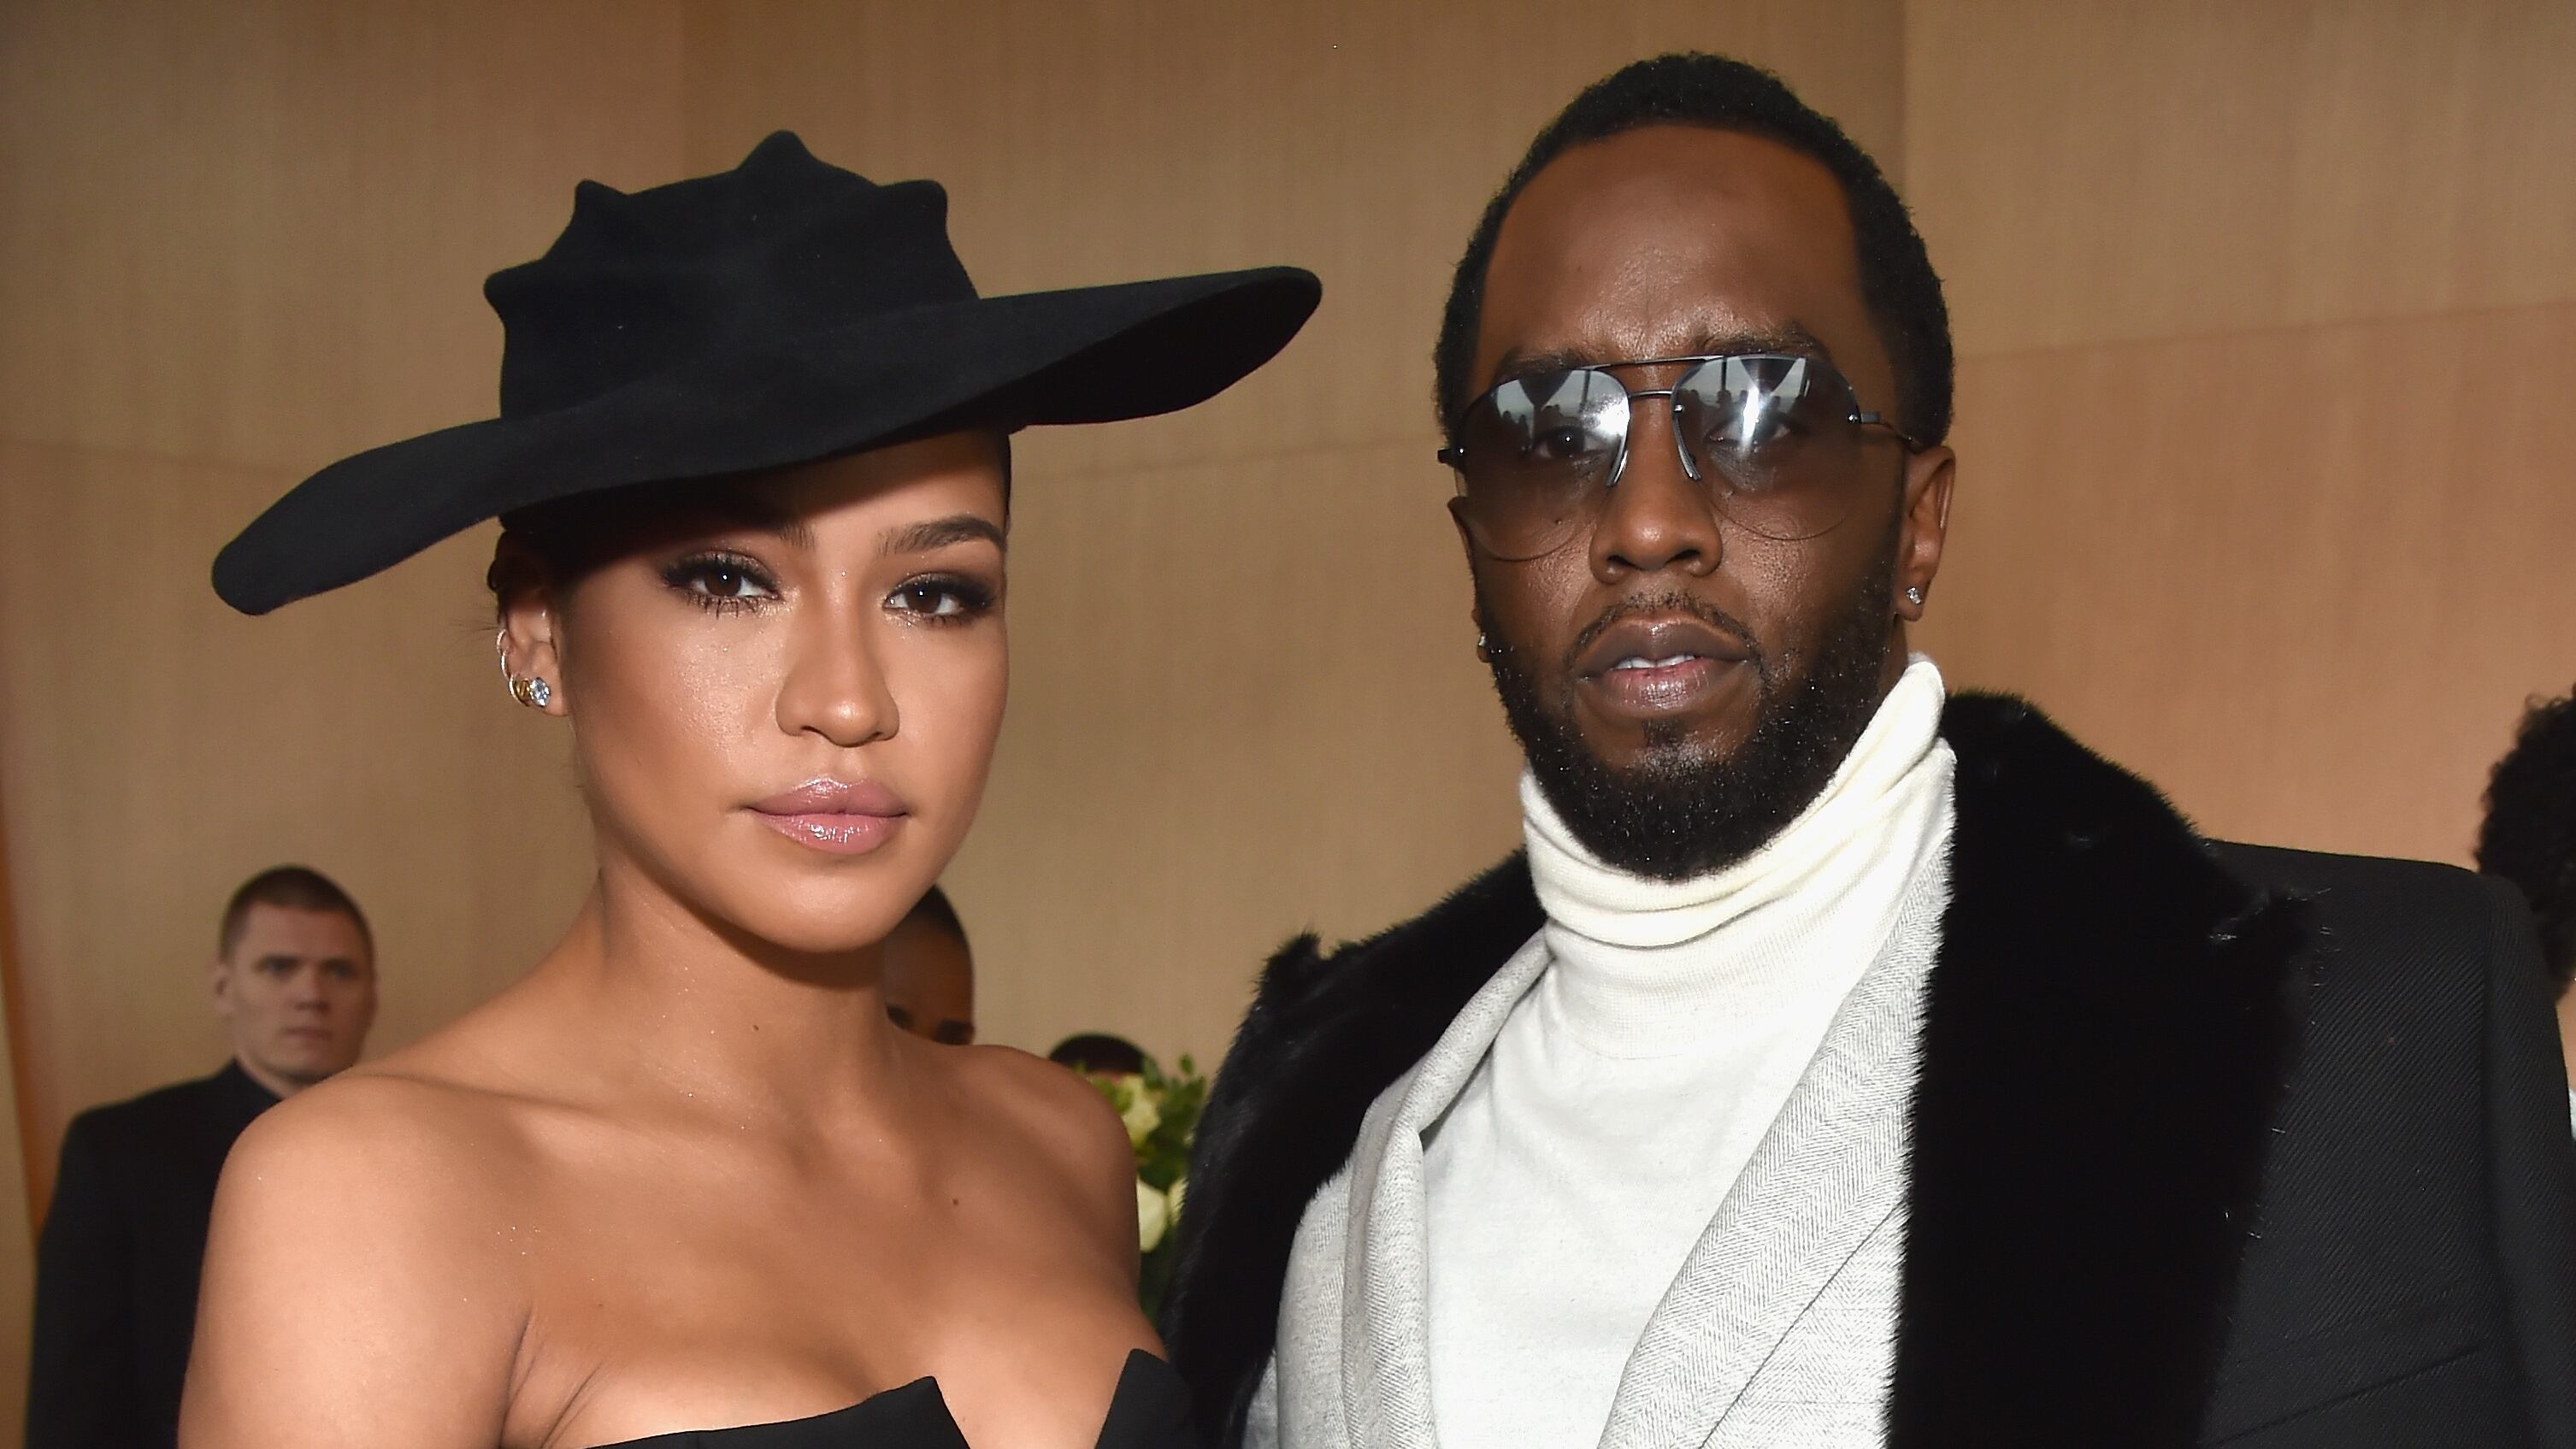 Cassandra Ventura, known as Cassie, and Sean Combs, known as Puff Daddy or Diddy, at an event in New York in January 2018.